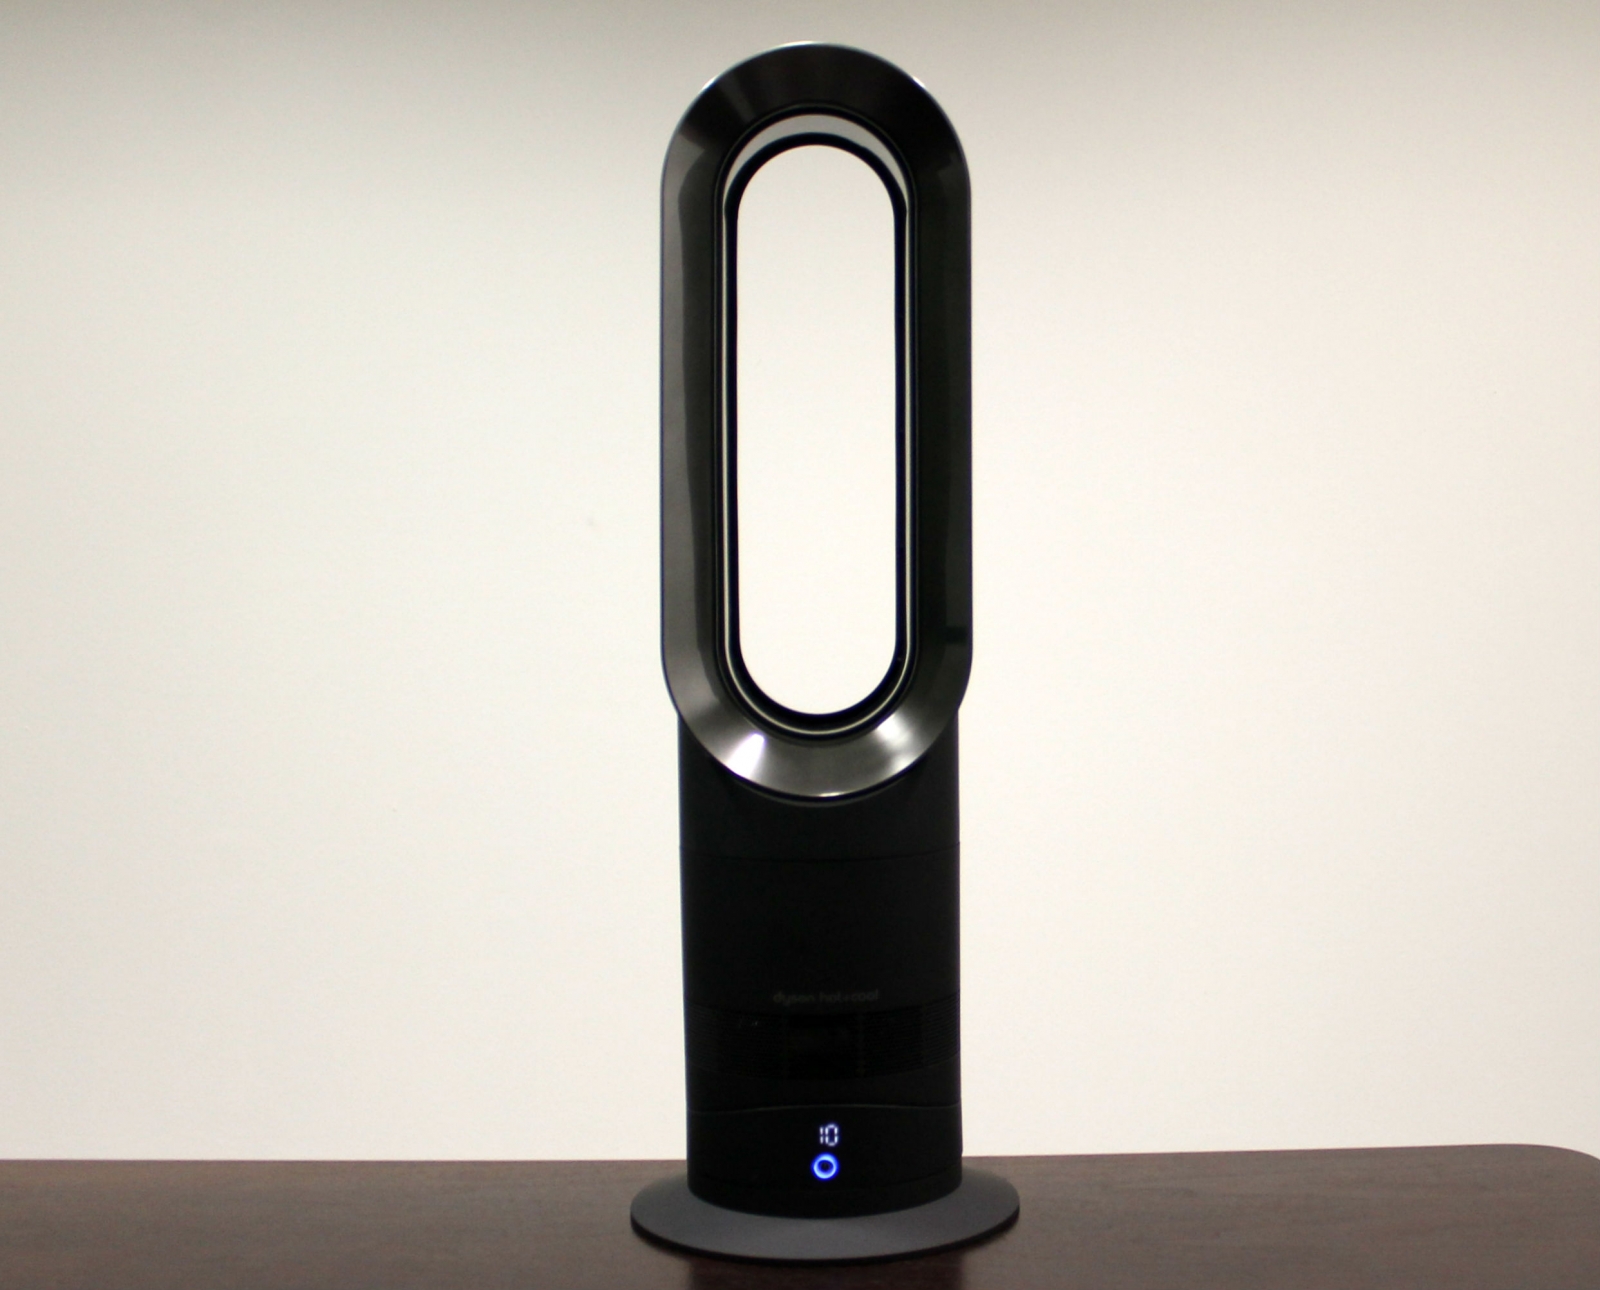 Dyson Hot + Cool Jet Focus review: A direct solution to home